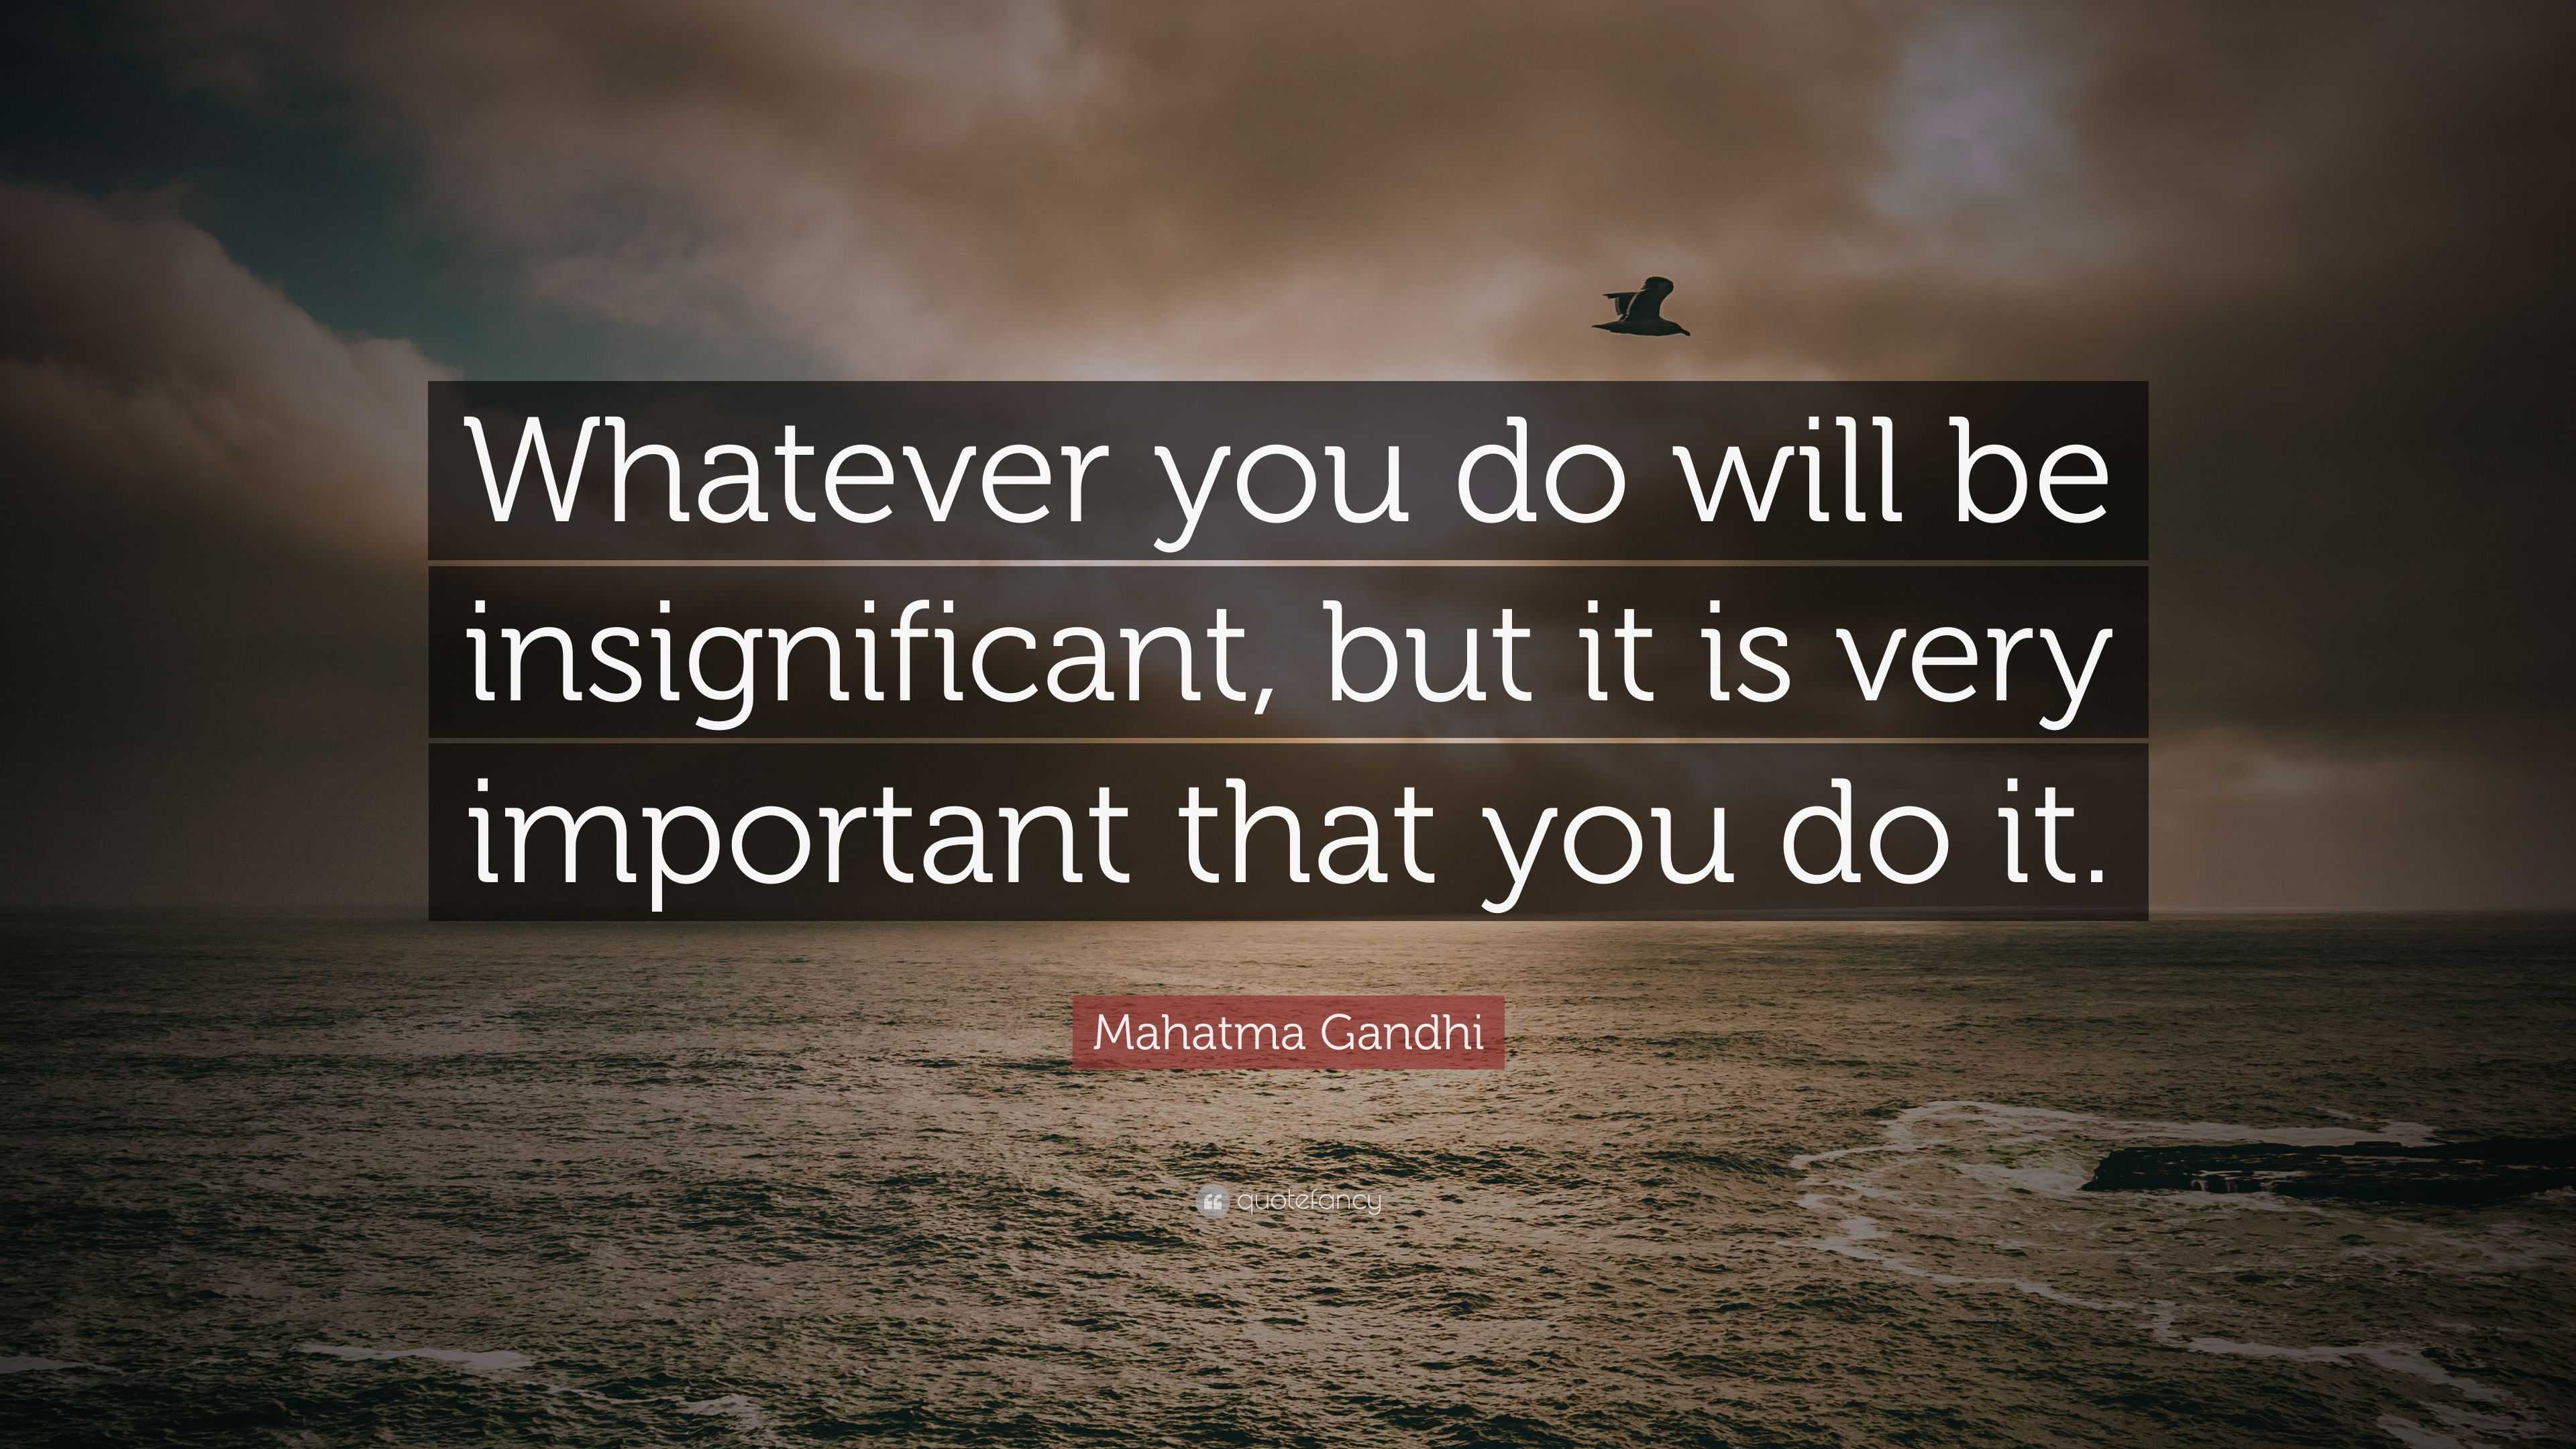 Mahatma Gandhi Quote: “Whatever you do will be insignificant, but it is